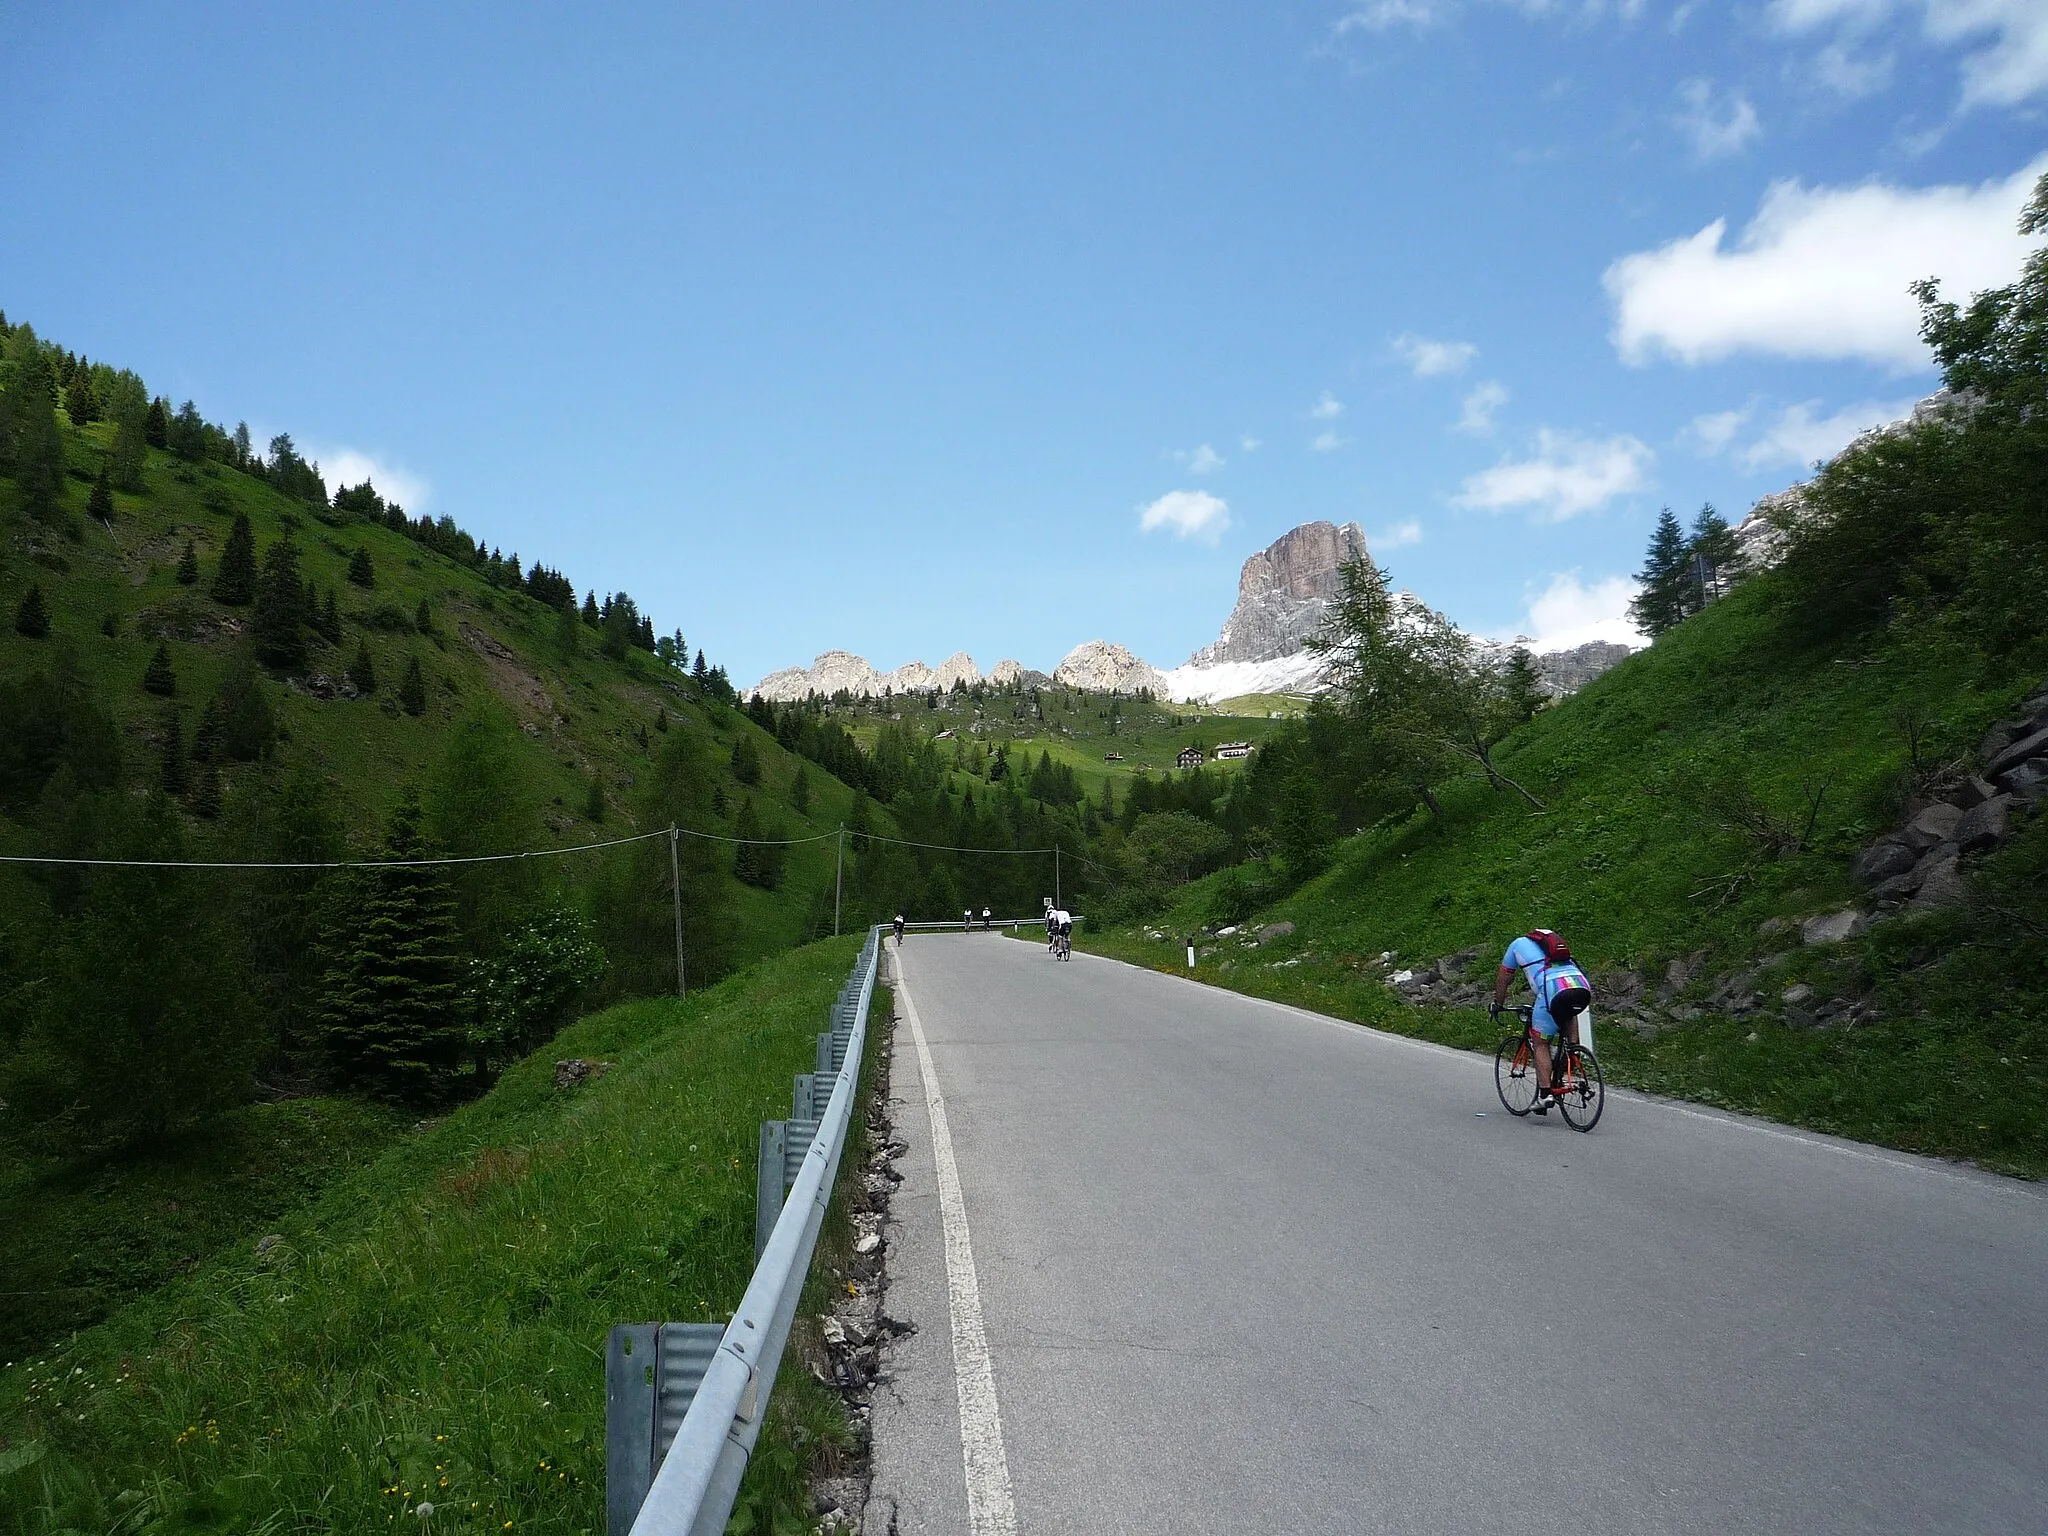 Photo showing: Toughest climb of the Maratona dles Dolomites. From Colle Santa Lucia:
Vertical climb: 922 m.
Average grade: 9.4 %
Highest grade: 14%
Starting elevation: 1,314 m.
Final elevation: 2,236 m.
Distance: 9.85 km
Total hairpins: 29

Times Giro d’Italia passed the Giau: 7